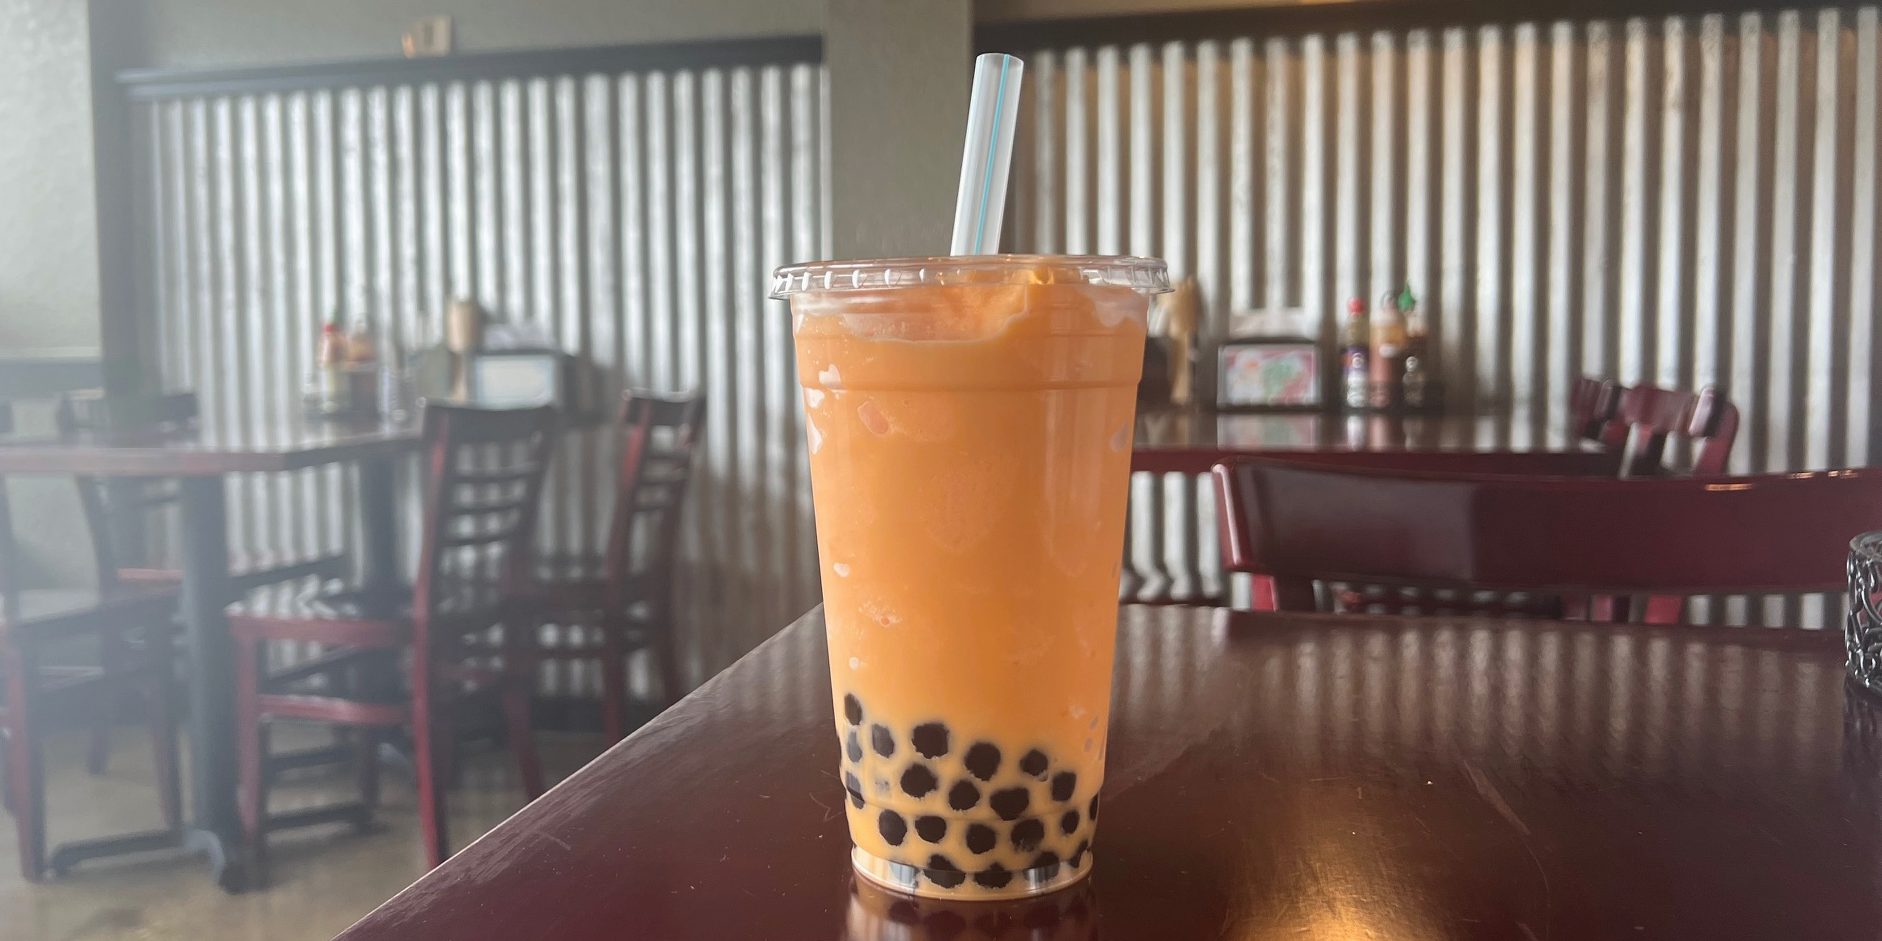 An orange slush with boba on the bottom on a cherry wood table in an empty restaurant.